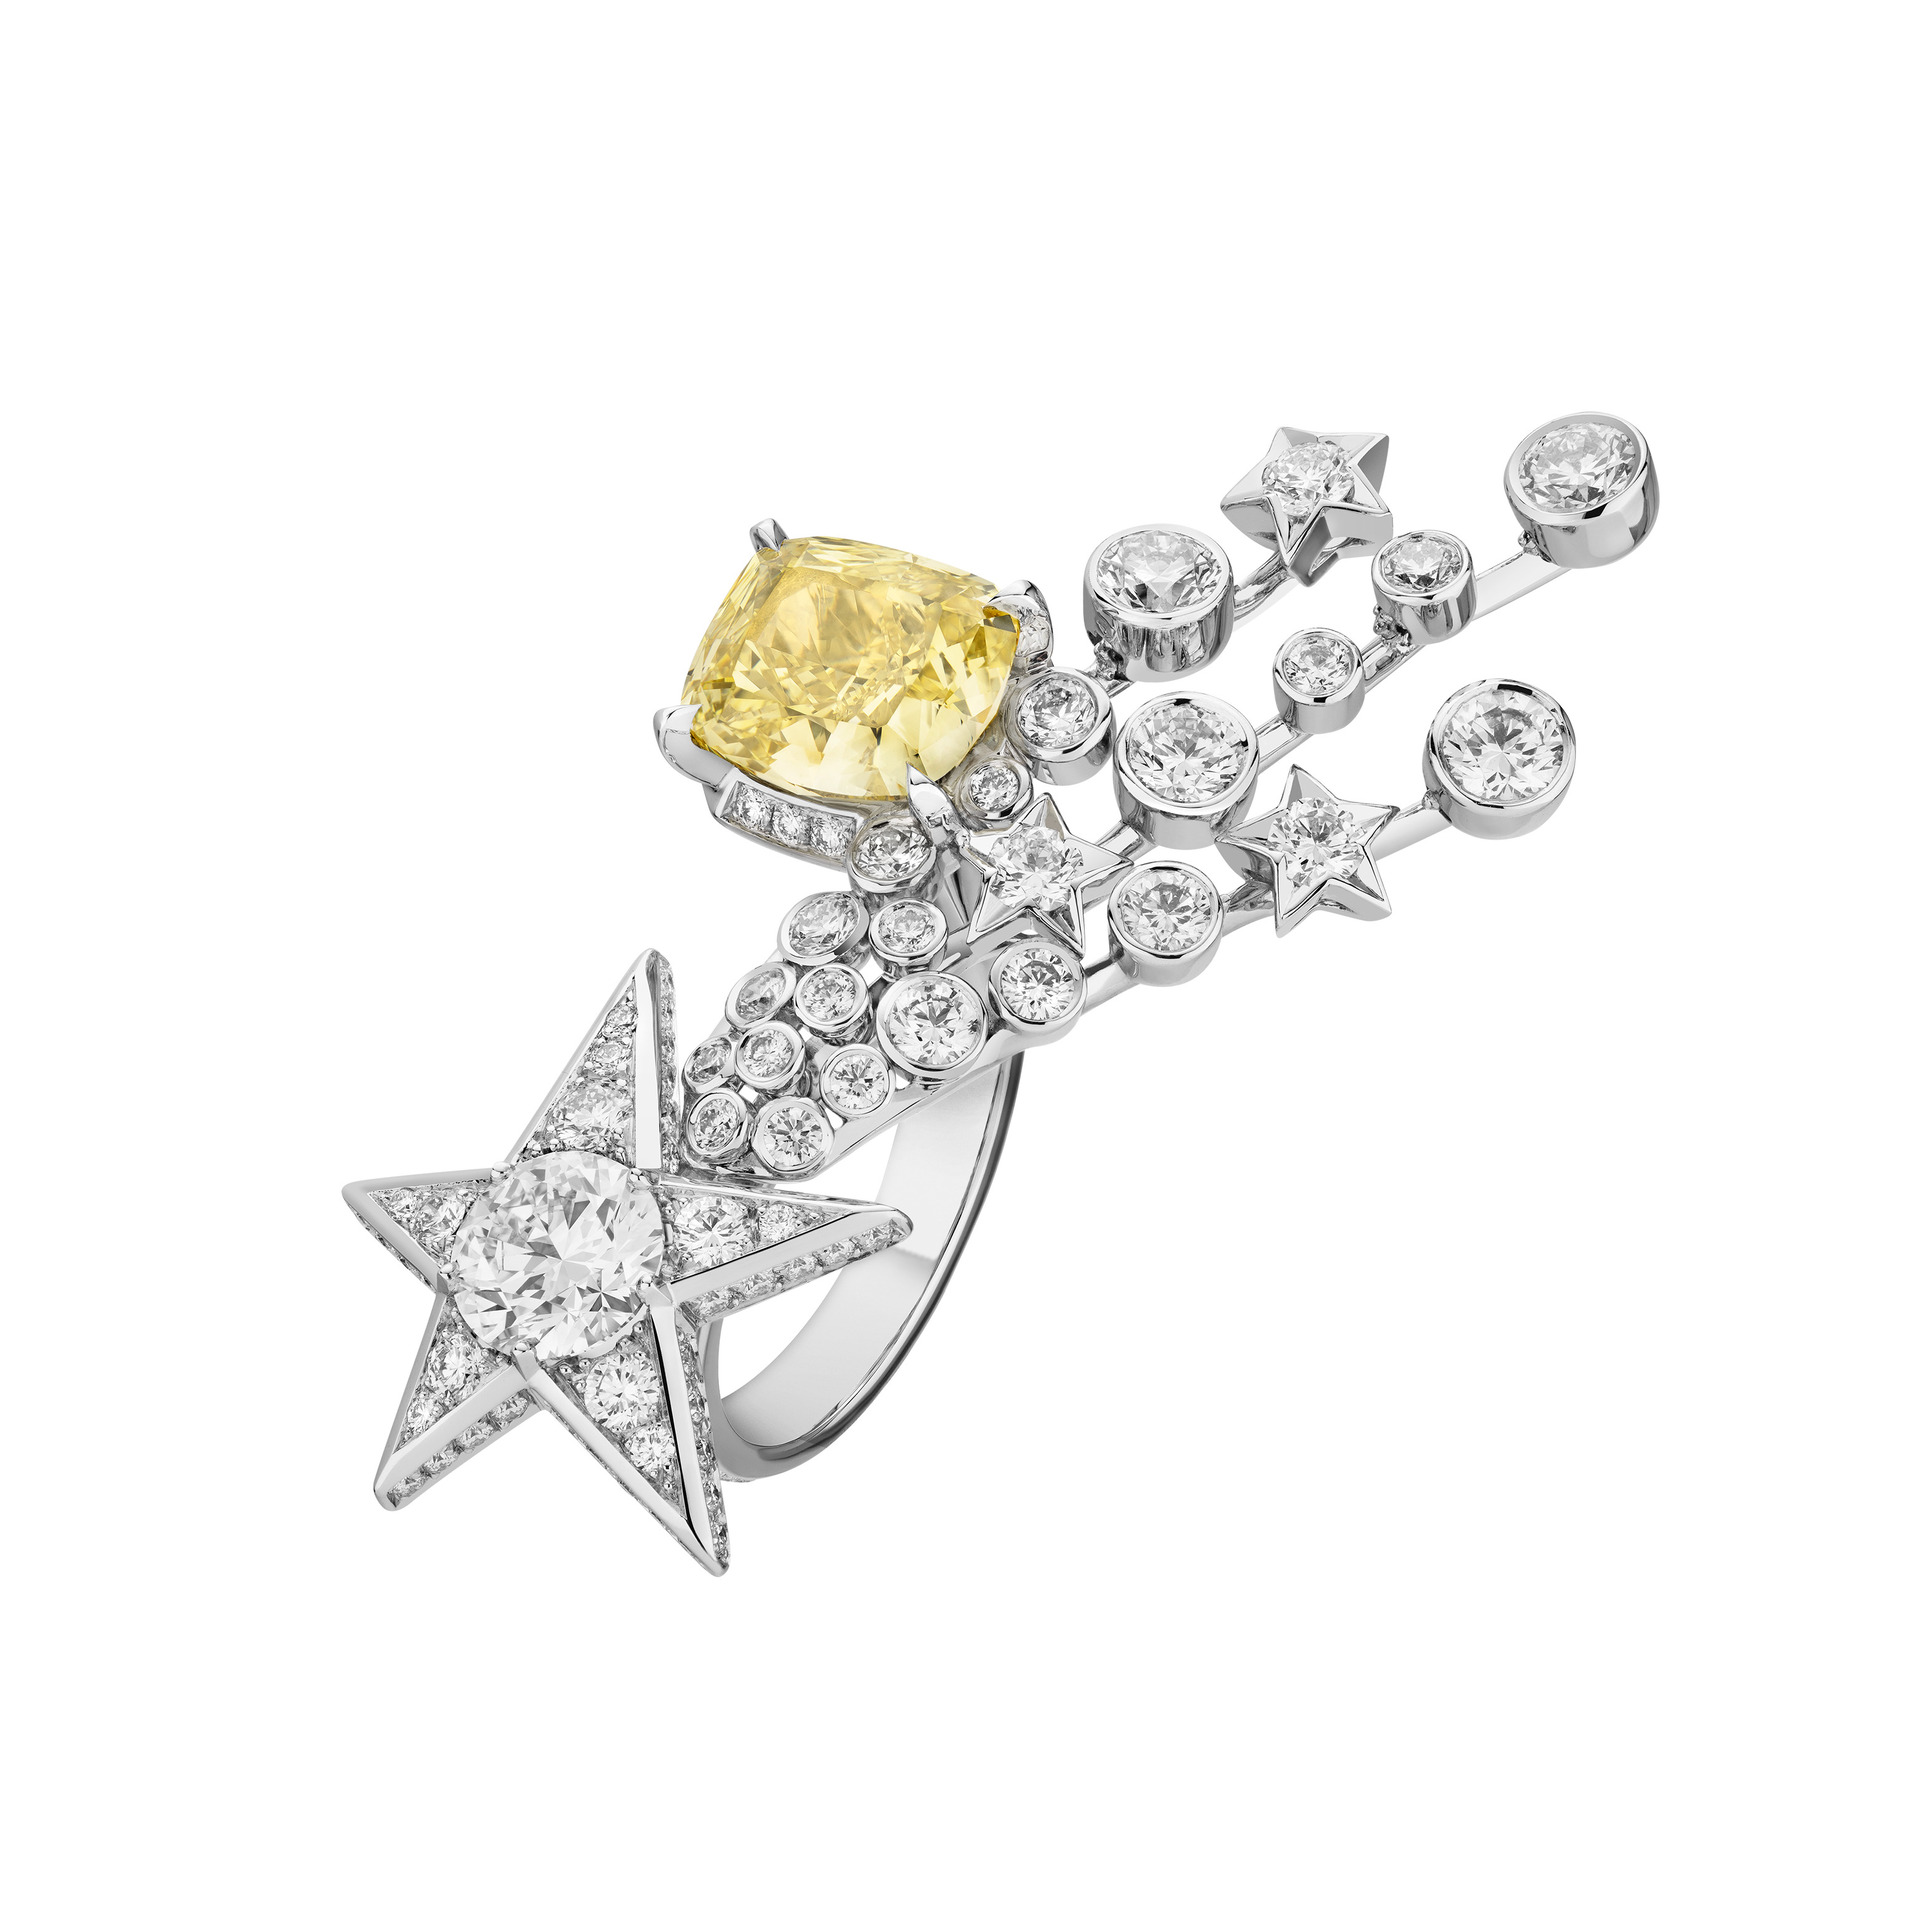 Chanel's Latest High Jewelry Collection Shoots For The Stars